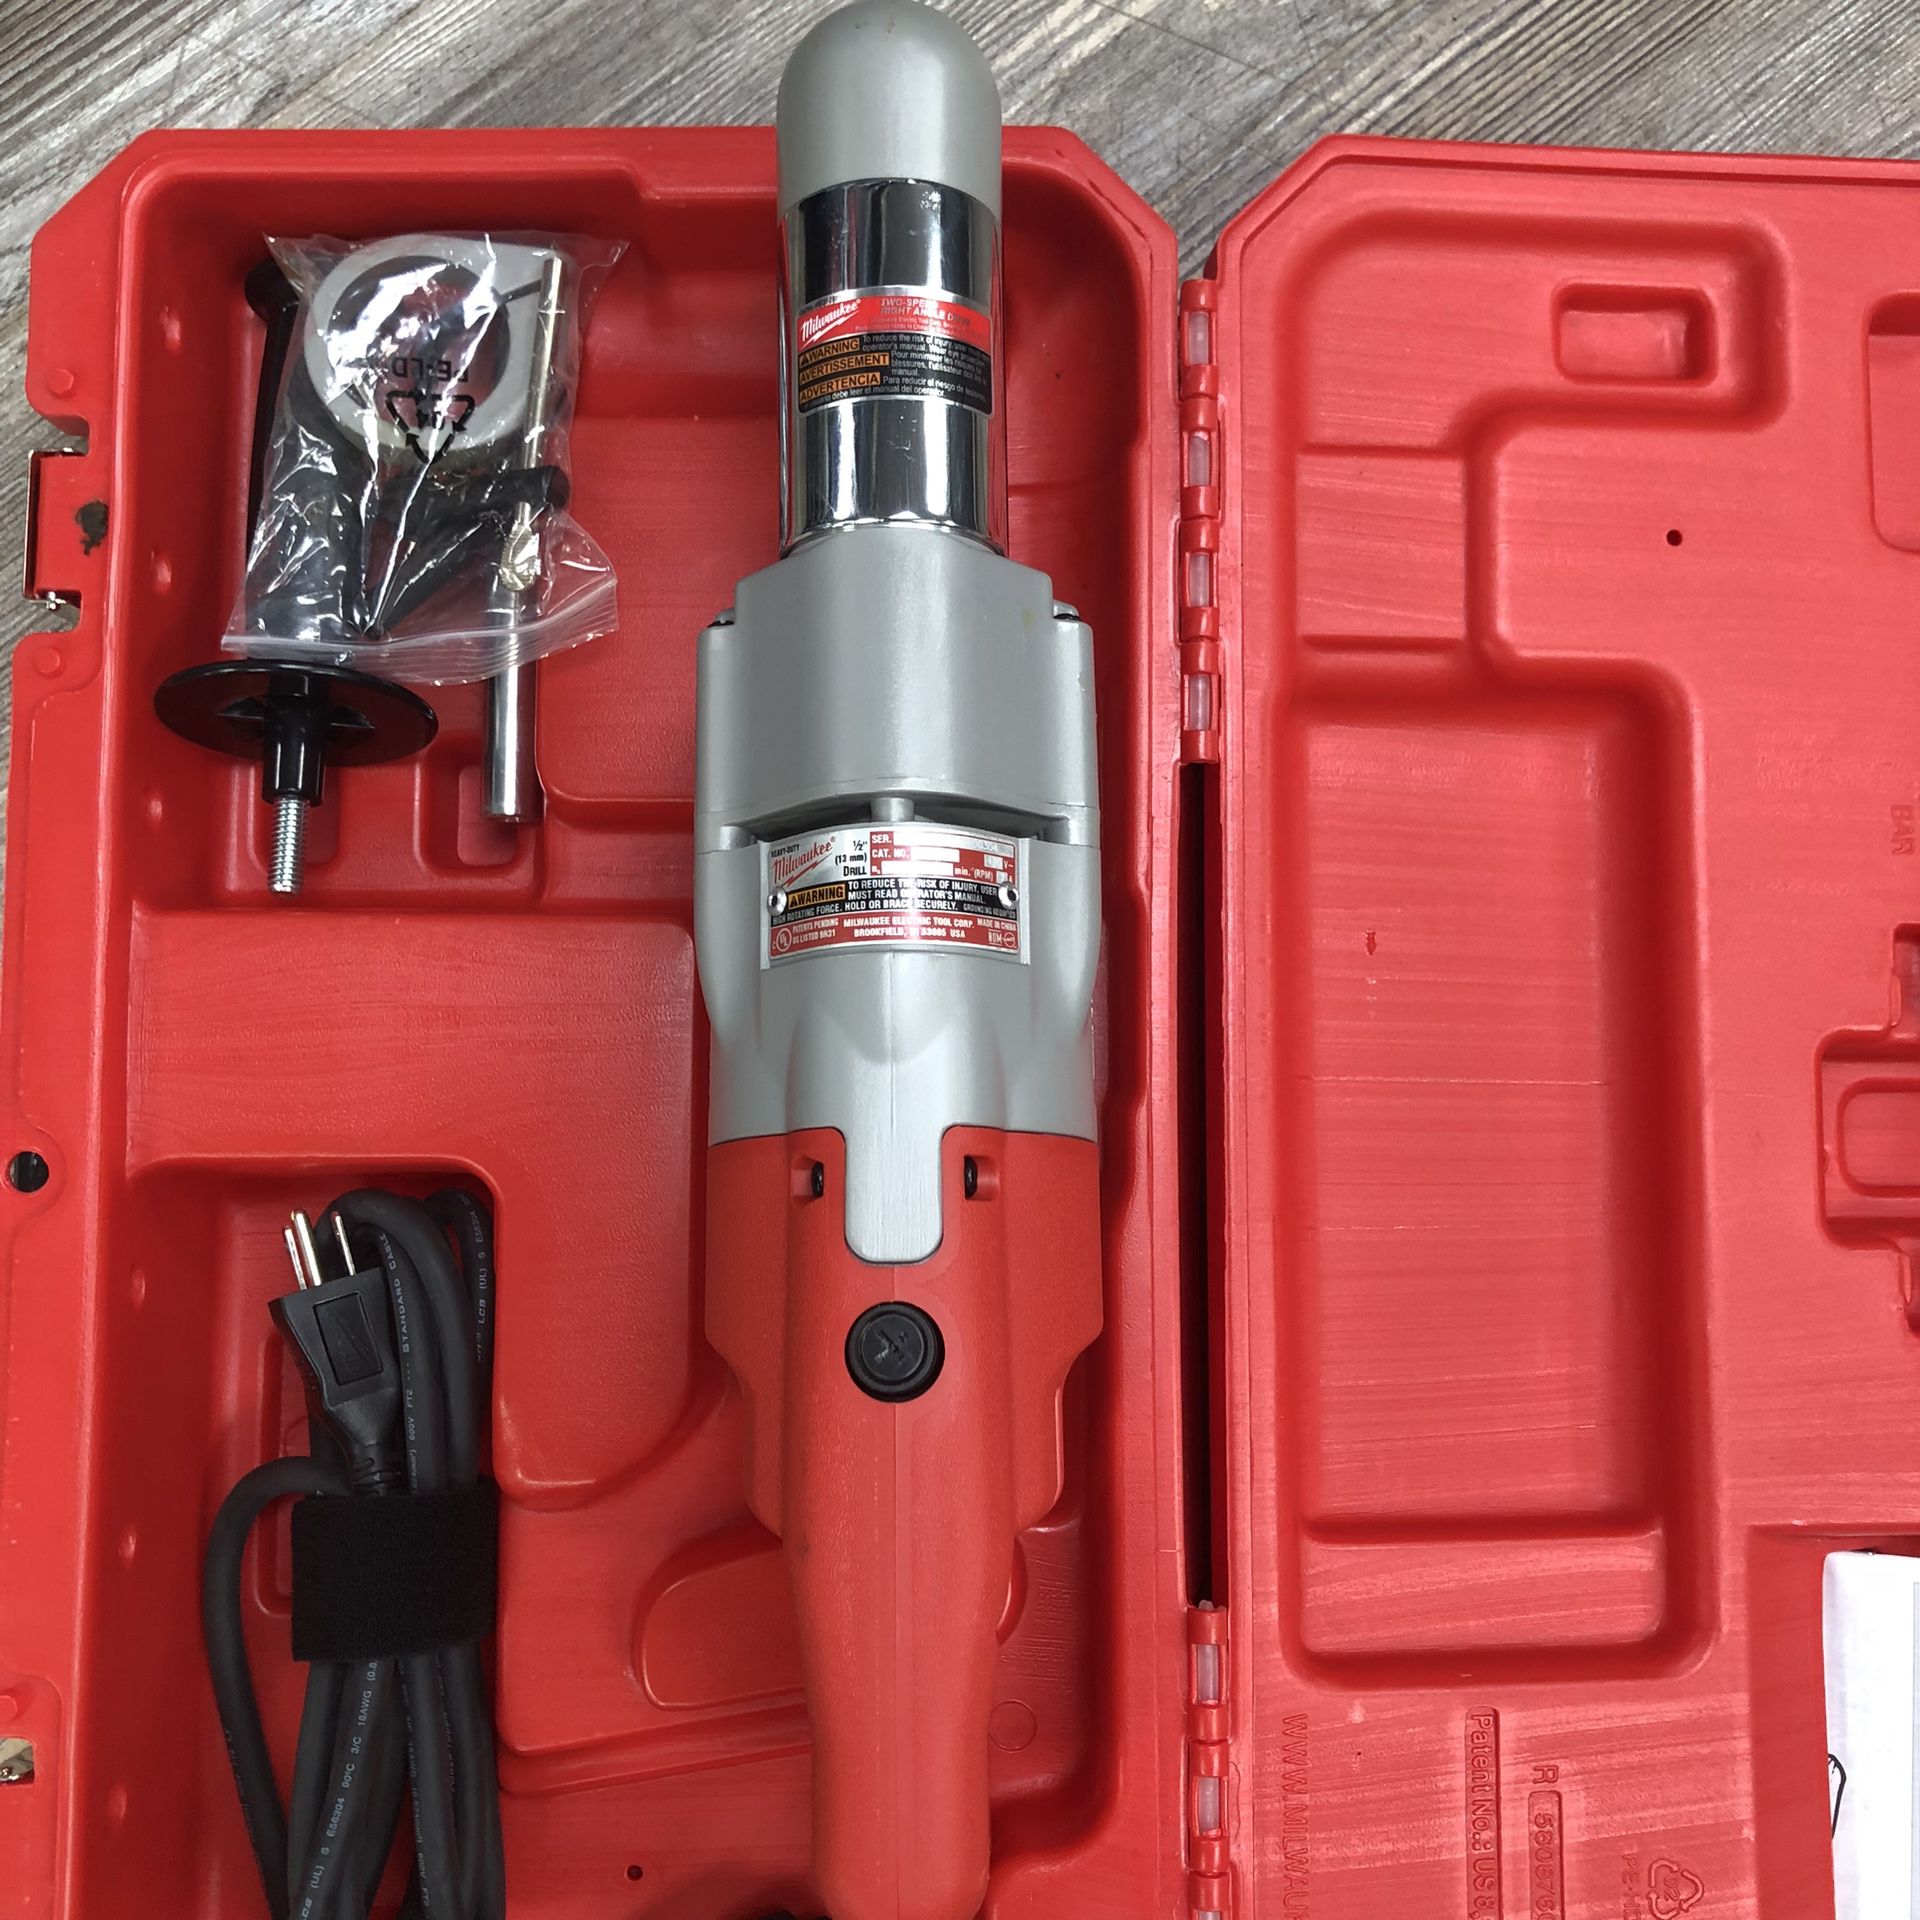 MILWAUKEE RIGHT ANGLE DRILL 1/2” for Sale in Taylor, MI OfferUp